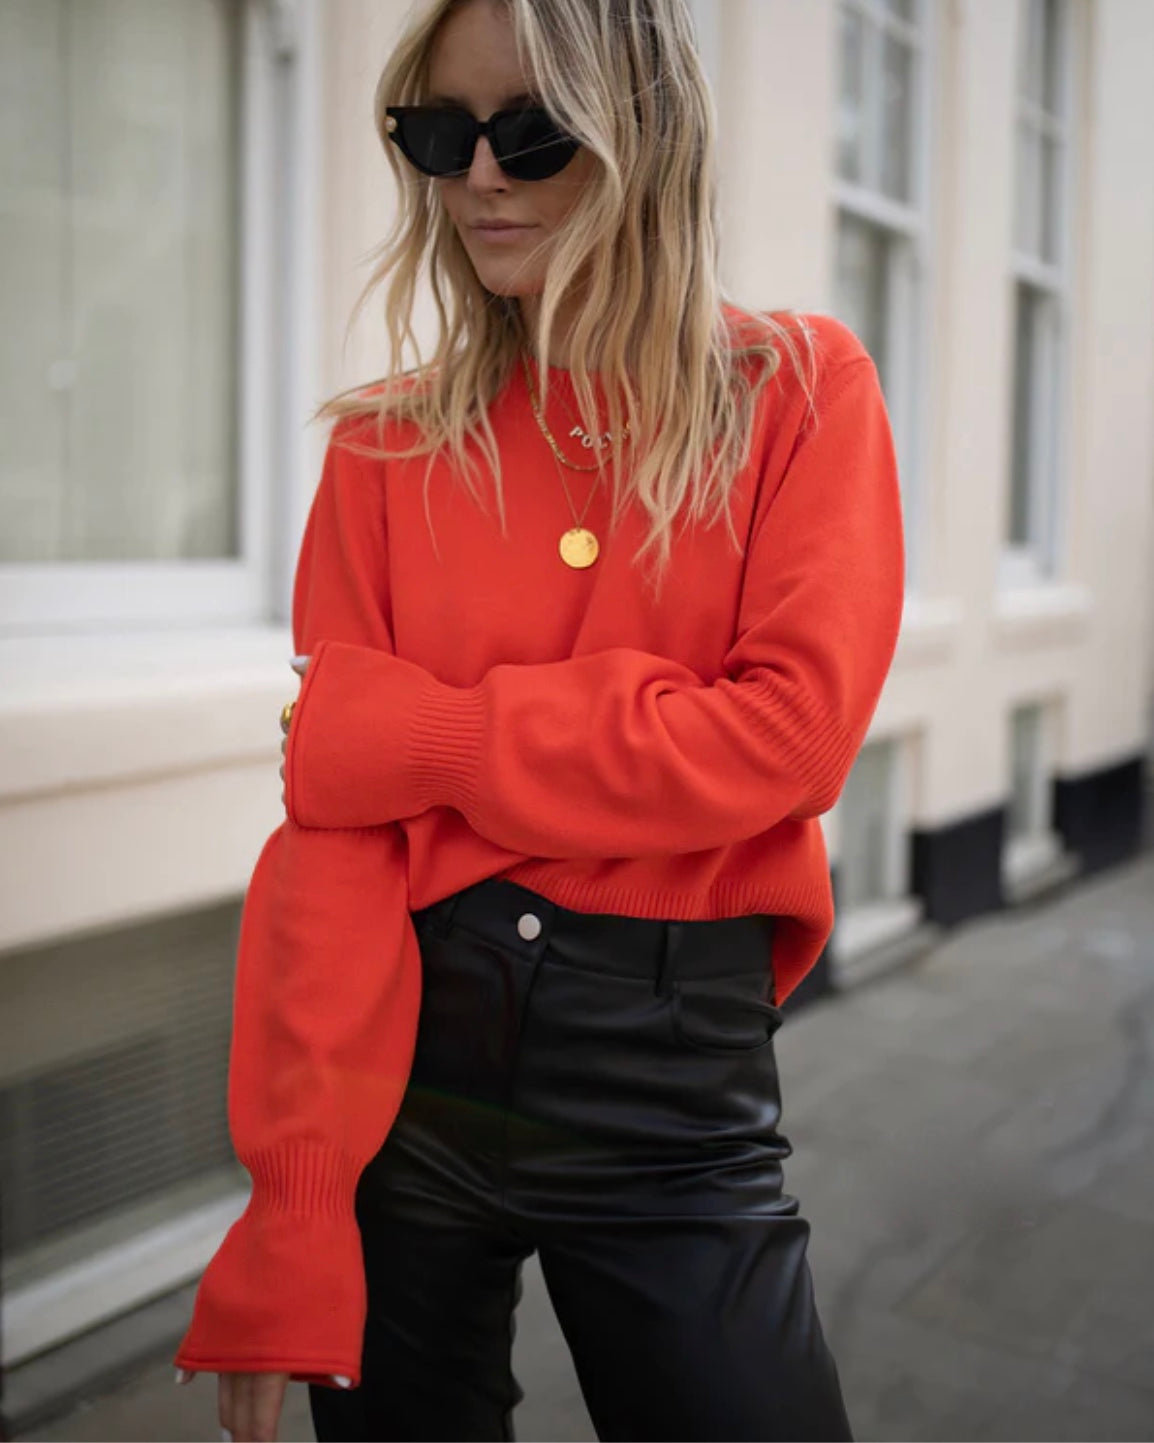 Model wearing French Connection Babysoft Crewneck Gather Jumper sweater in Fiery Red wearing black faux leather pants and sunglasses in a building 